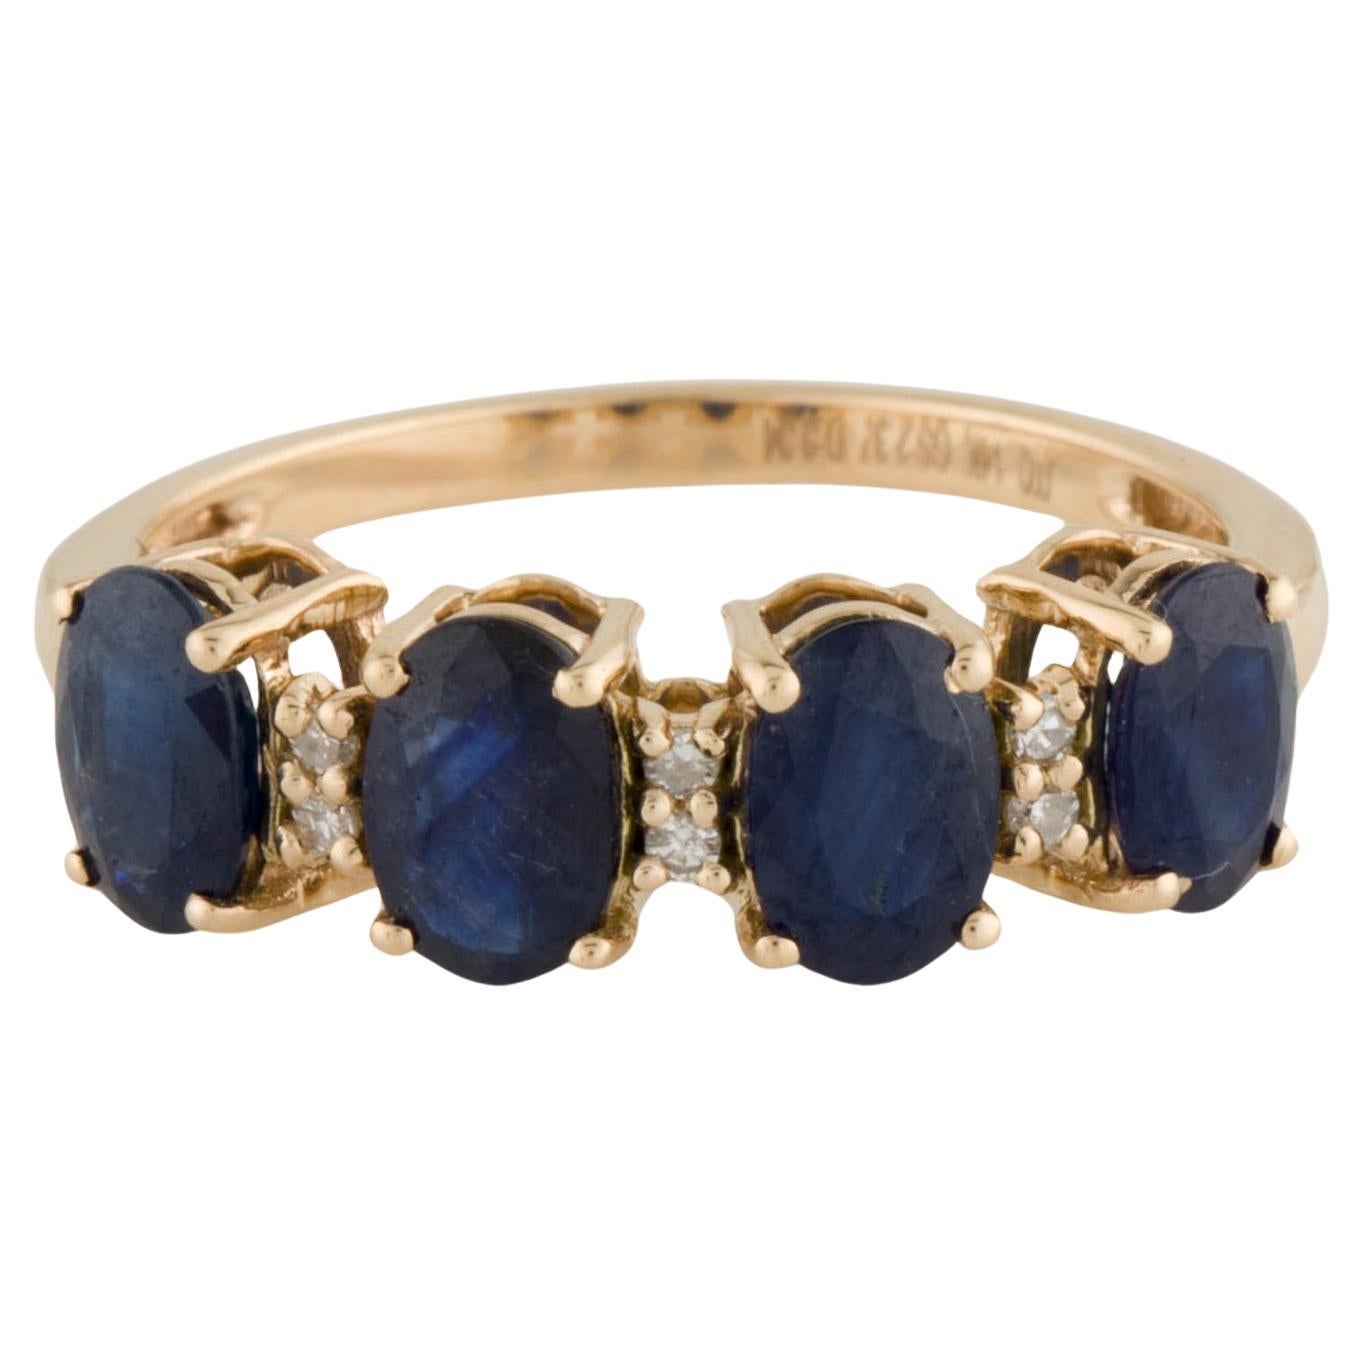 Luxurious 14K Gold Sapphire & Diamond Cocktail Ring - Size 6.75 - Fine Jewelry For Sale